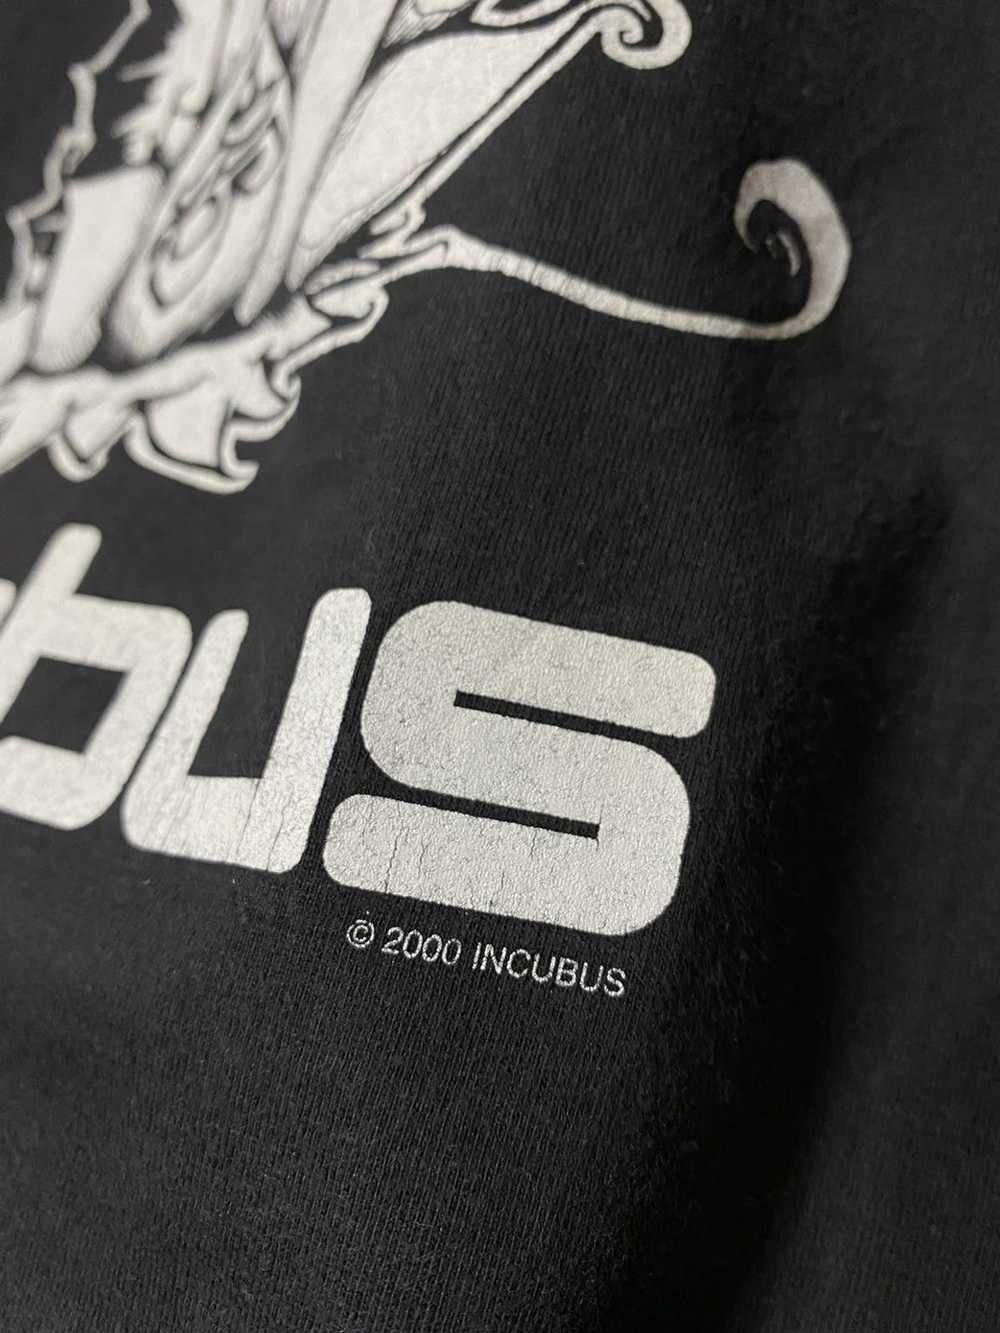 Band Tees × Vintage VINTAGE 2000's INCUBUS BAND T… - image 3